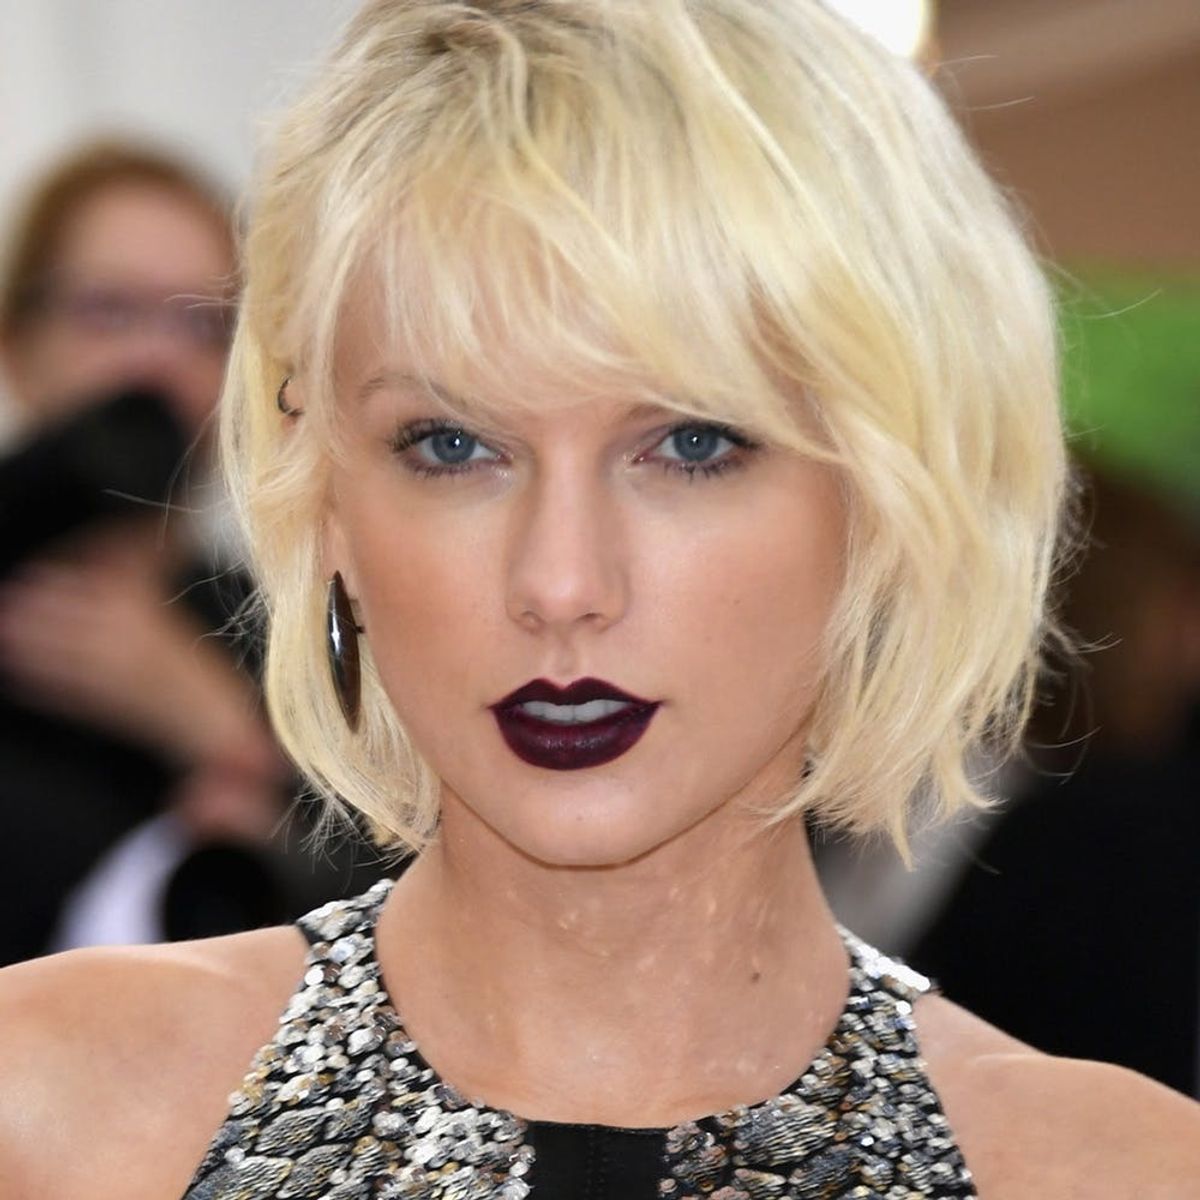 Taylor Swift’s Met Gala Look Is the Epitome of Gothic Chic